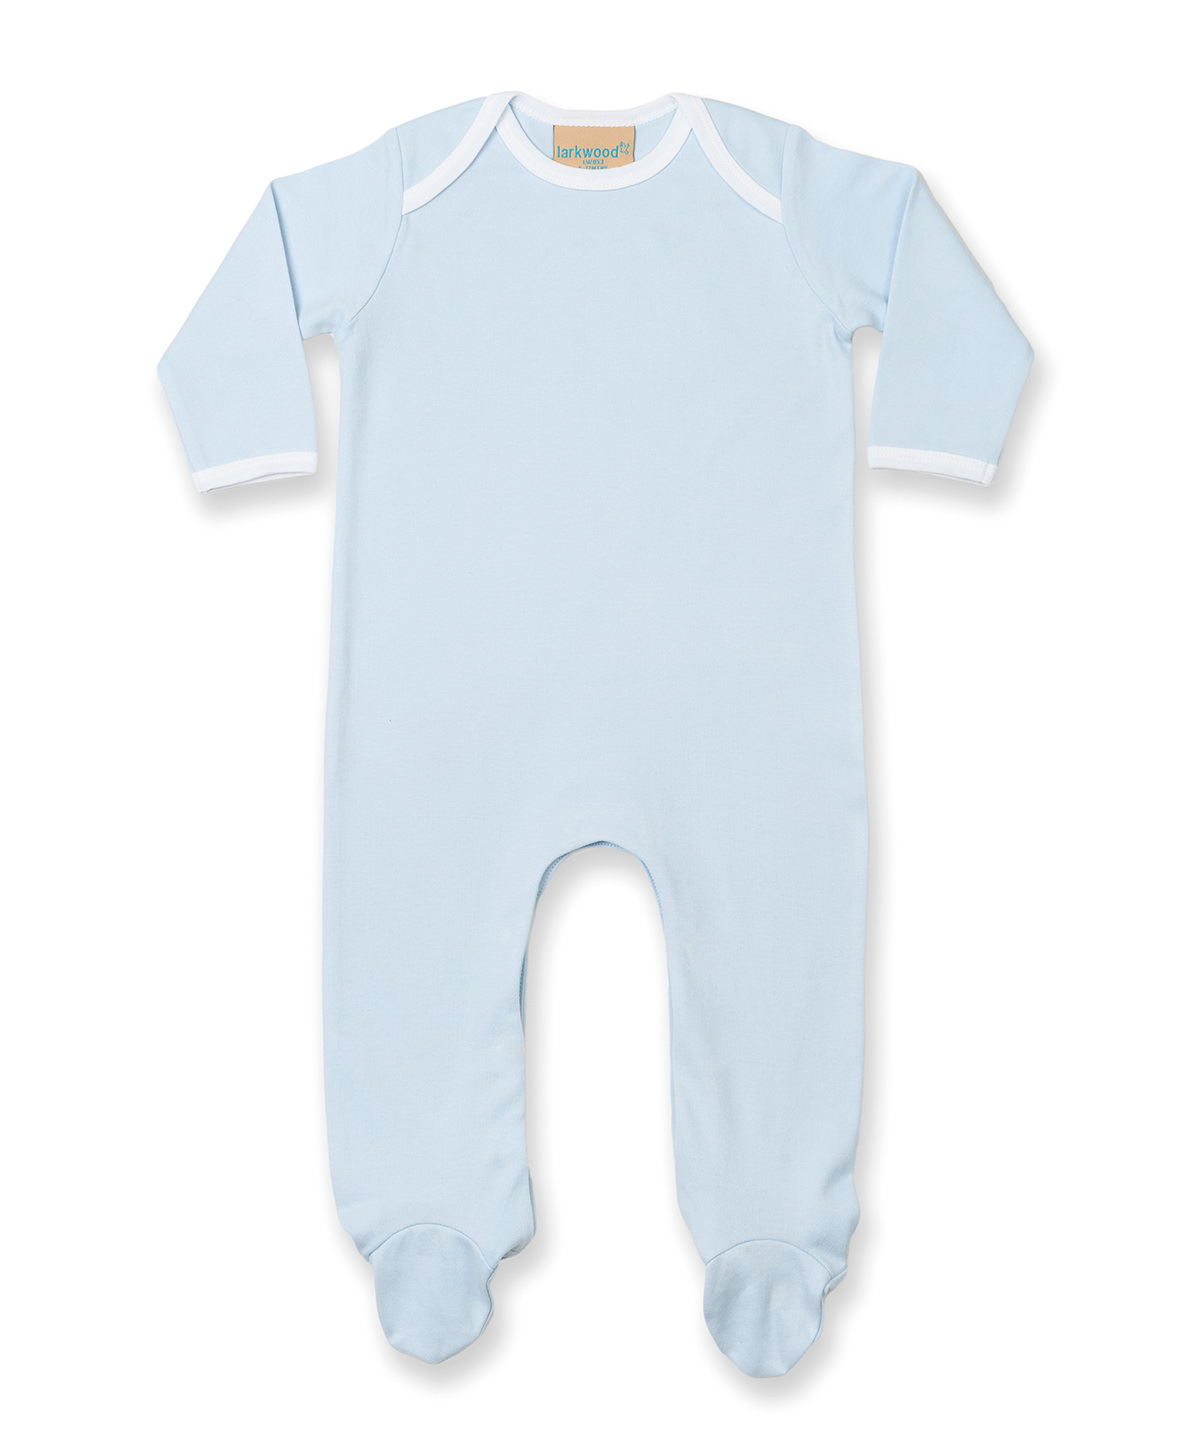 Contrast Long Sleeve Sleepsuit Pale Blue/White Size 3